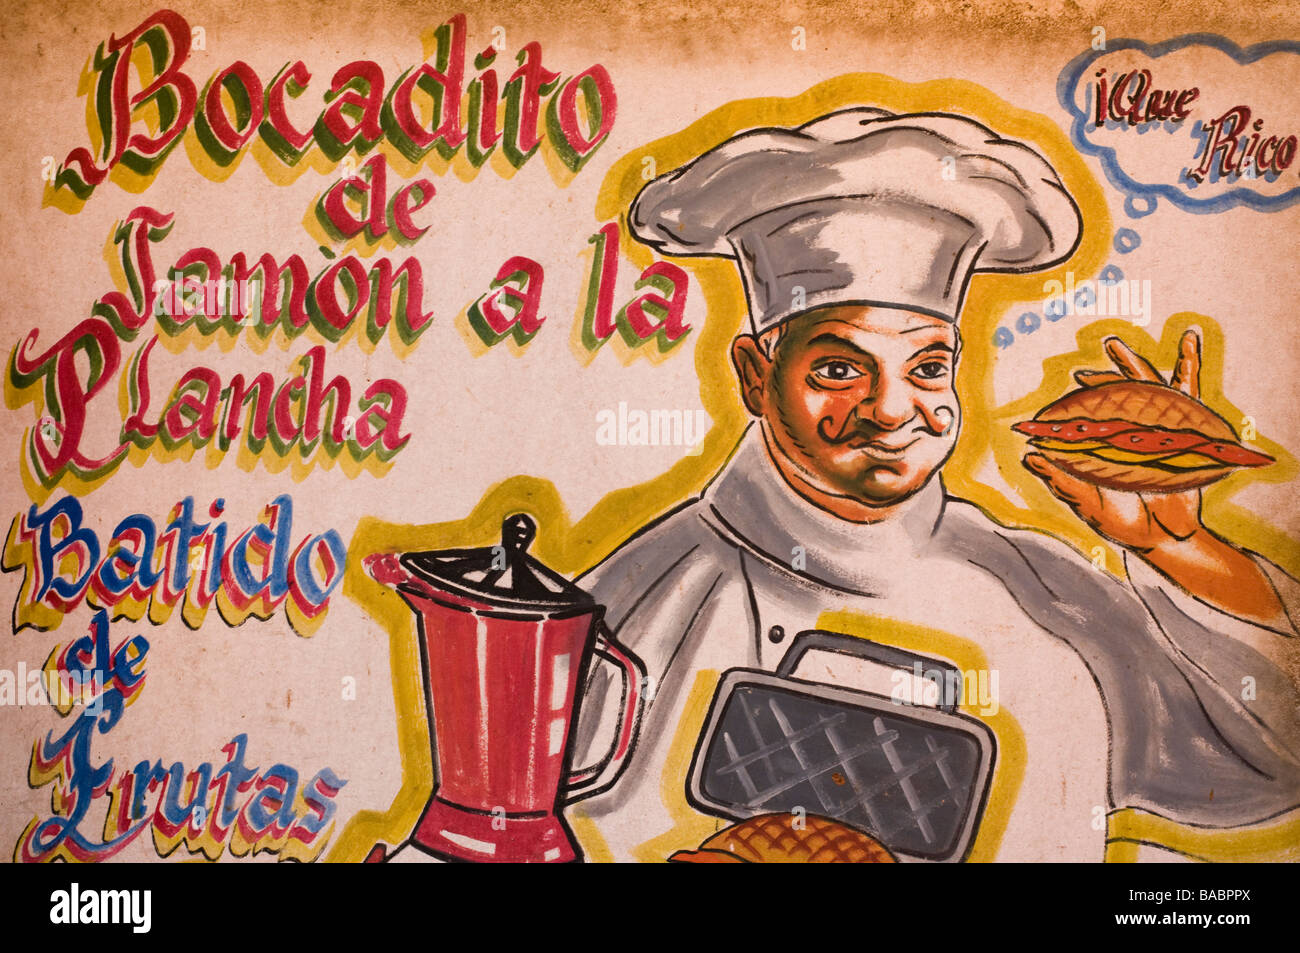 Advertising sign for a sandwich shop in Trinidad, Cuba encouraging the purchase of ham sandwiches with a fruit milkshake. Stock Photo